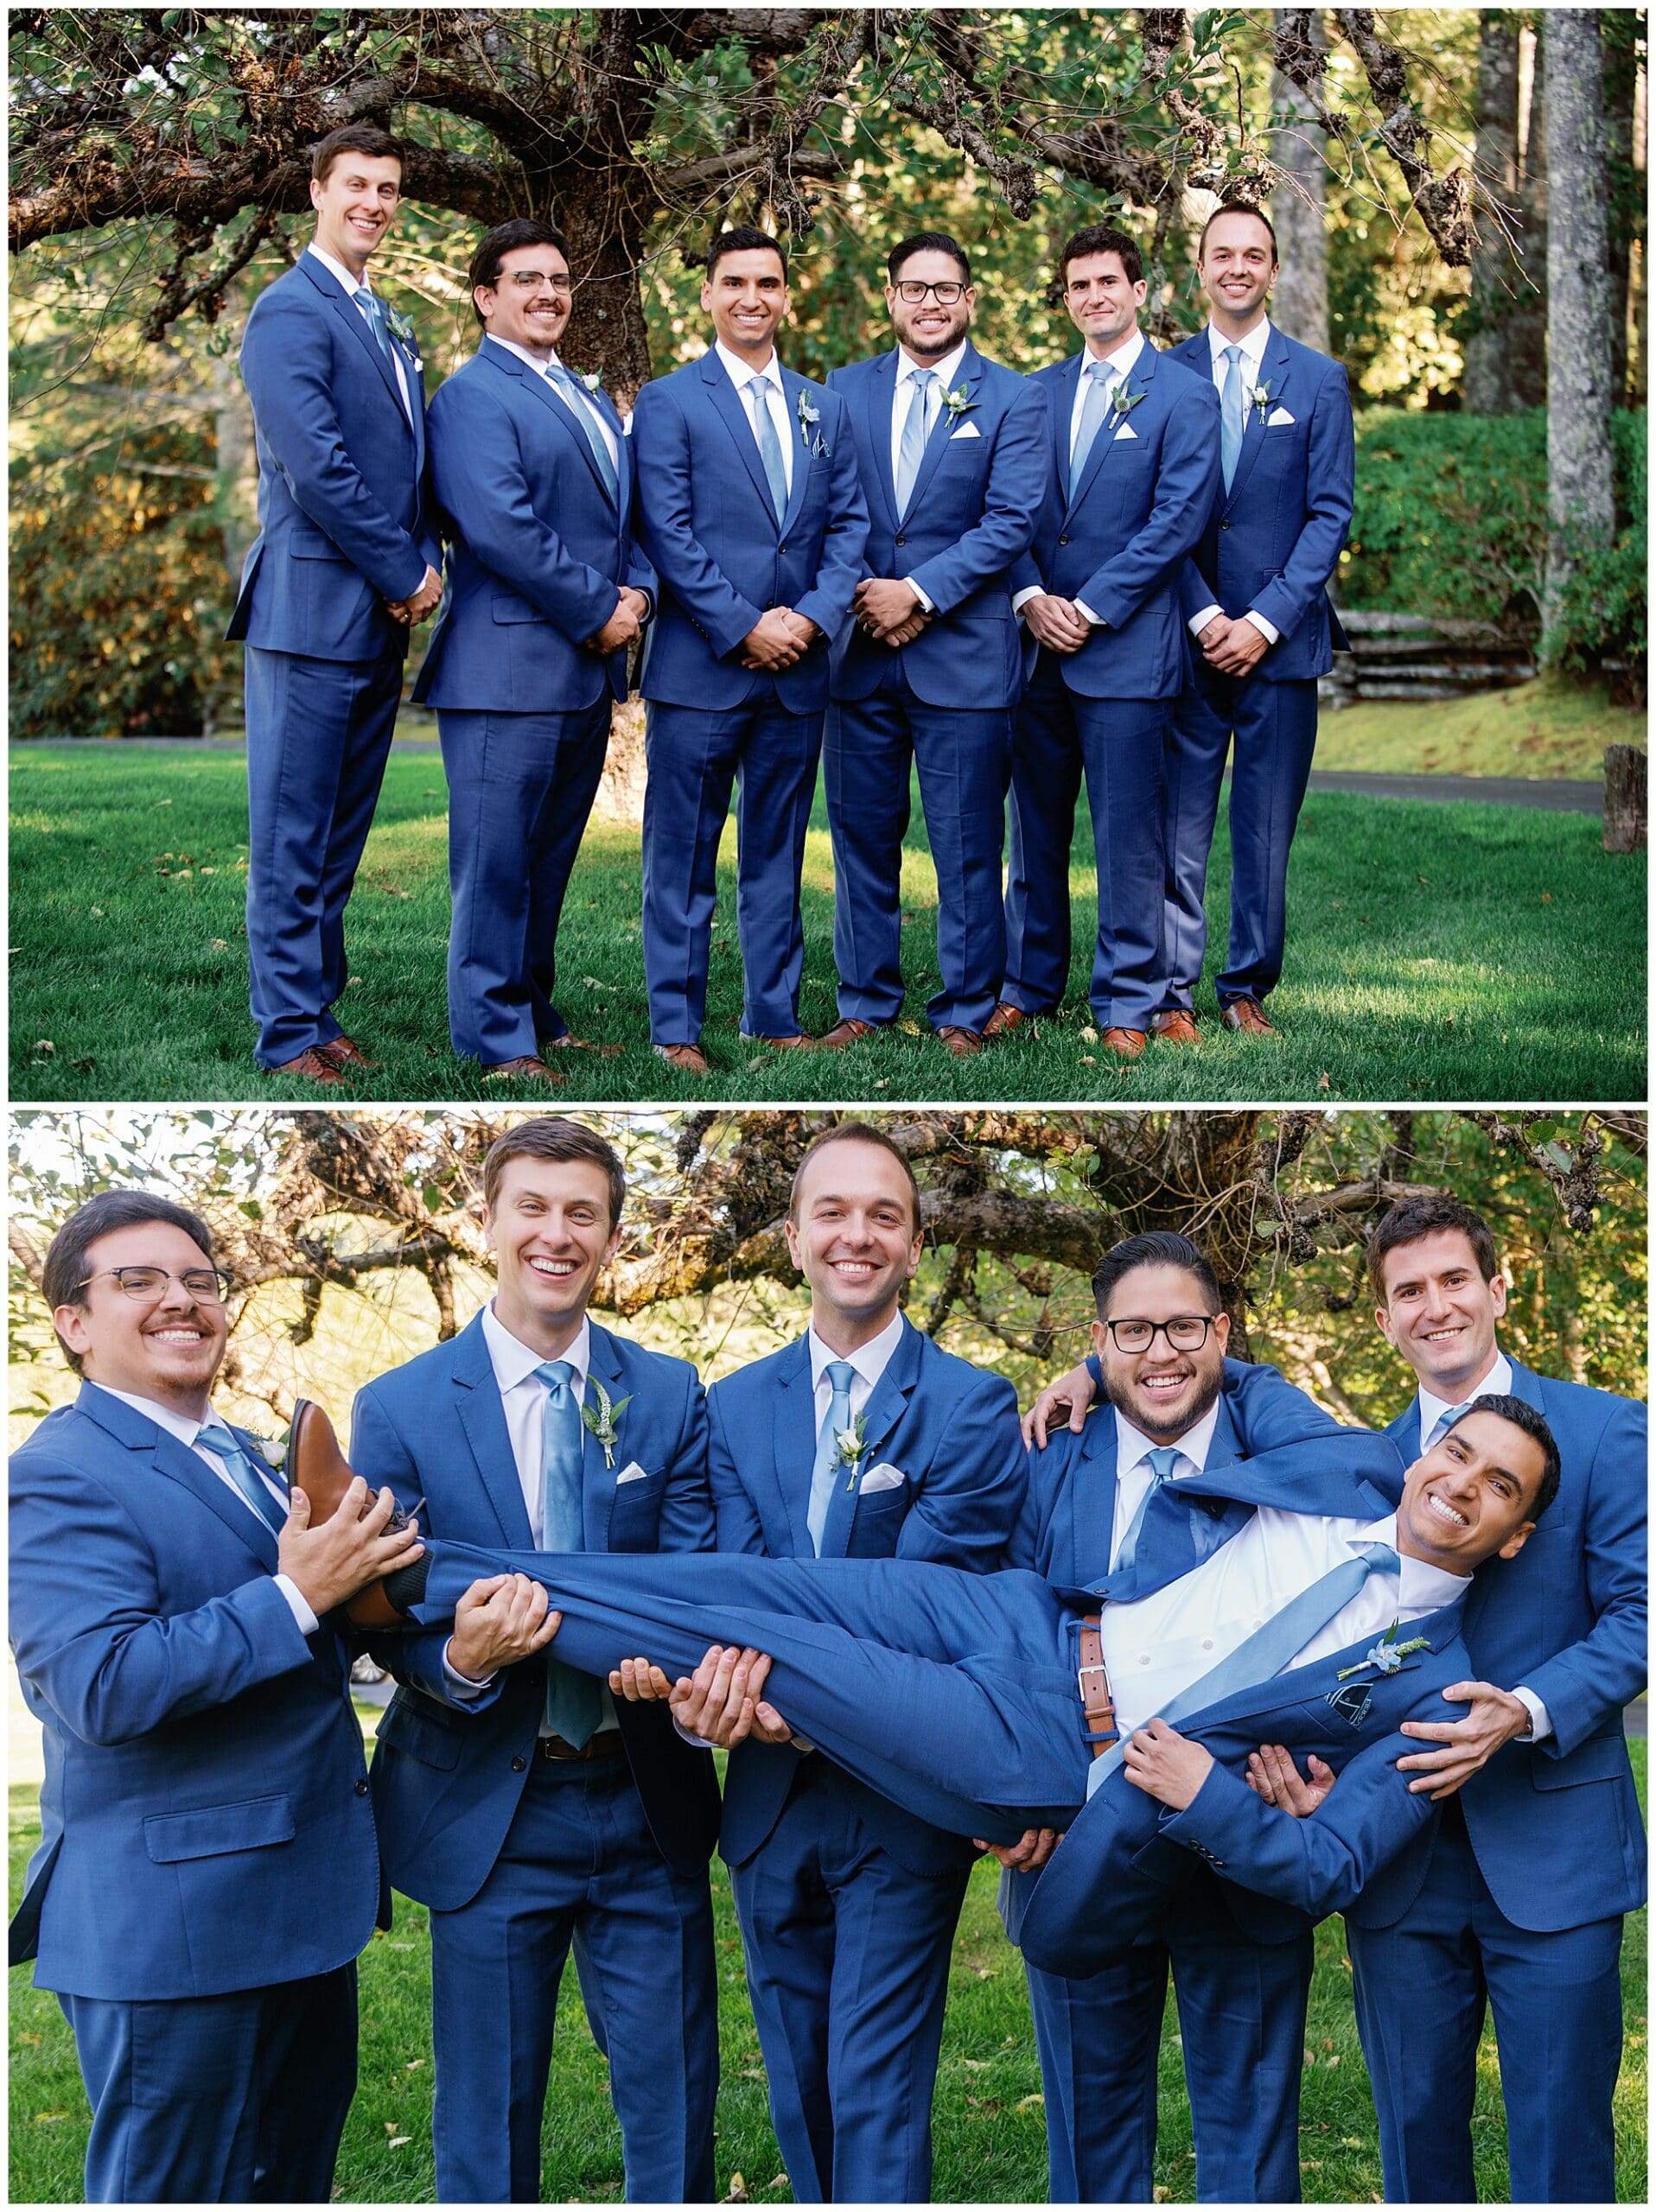 A group of groomsmen in blue suits posing for a photo.